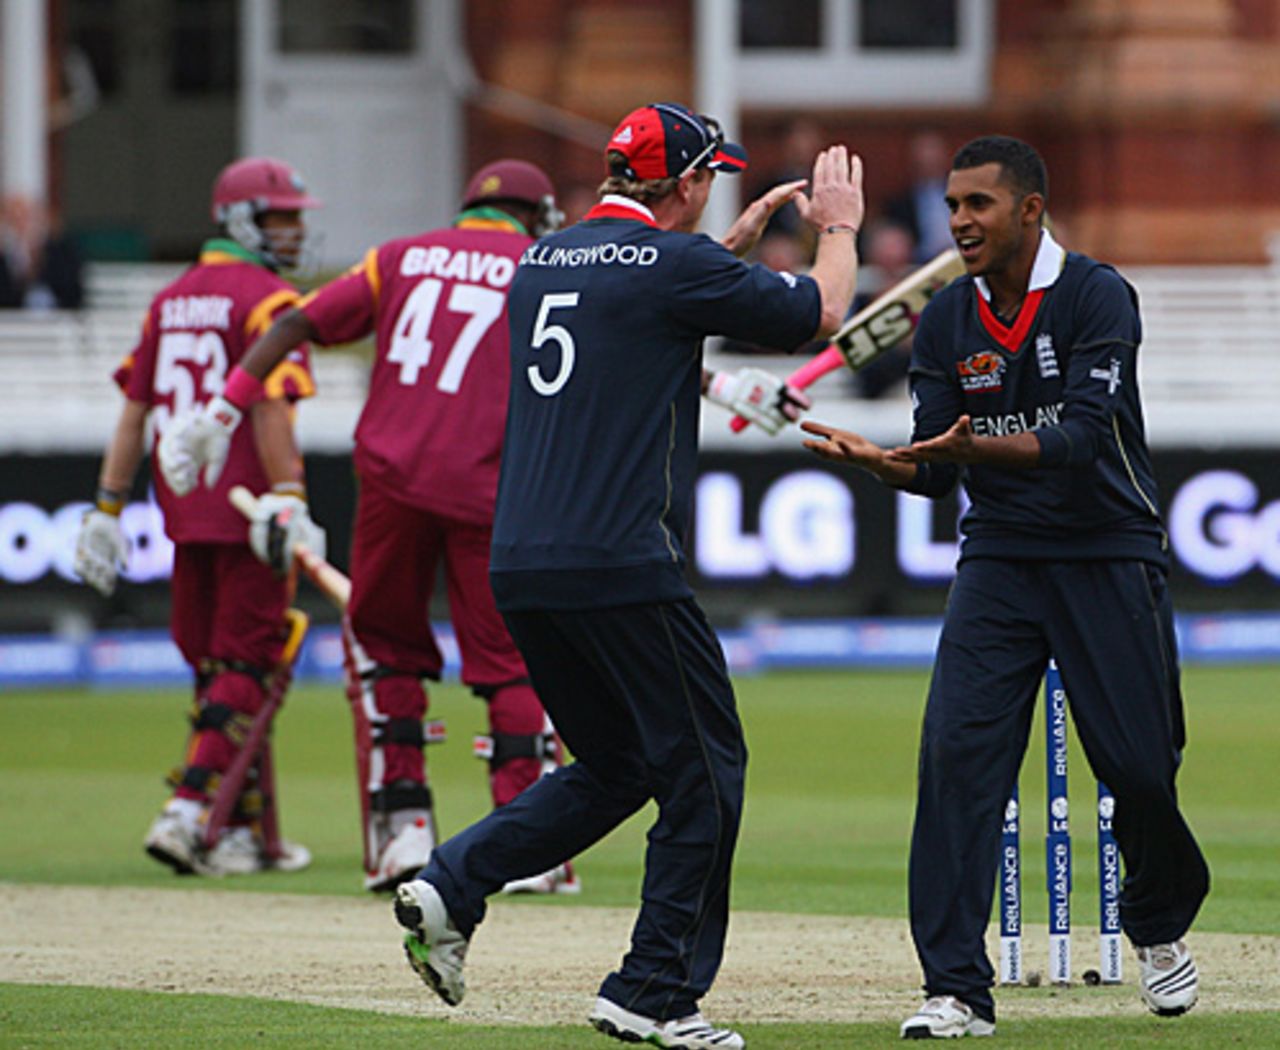 Paul Collingwood gives Adil Rashid five after the young legspinner finished with figures of 1 for 20 from his four overs, England v West Indies, ICC World Twenty20 warm-up, Lord's, June 3, 2009